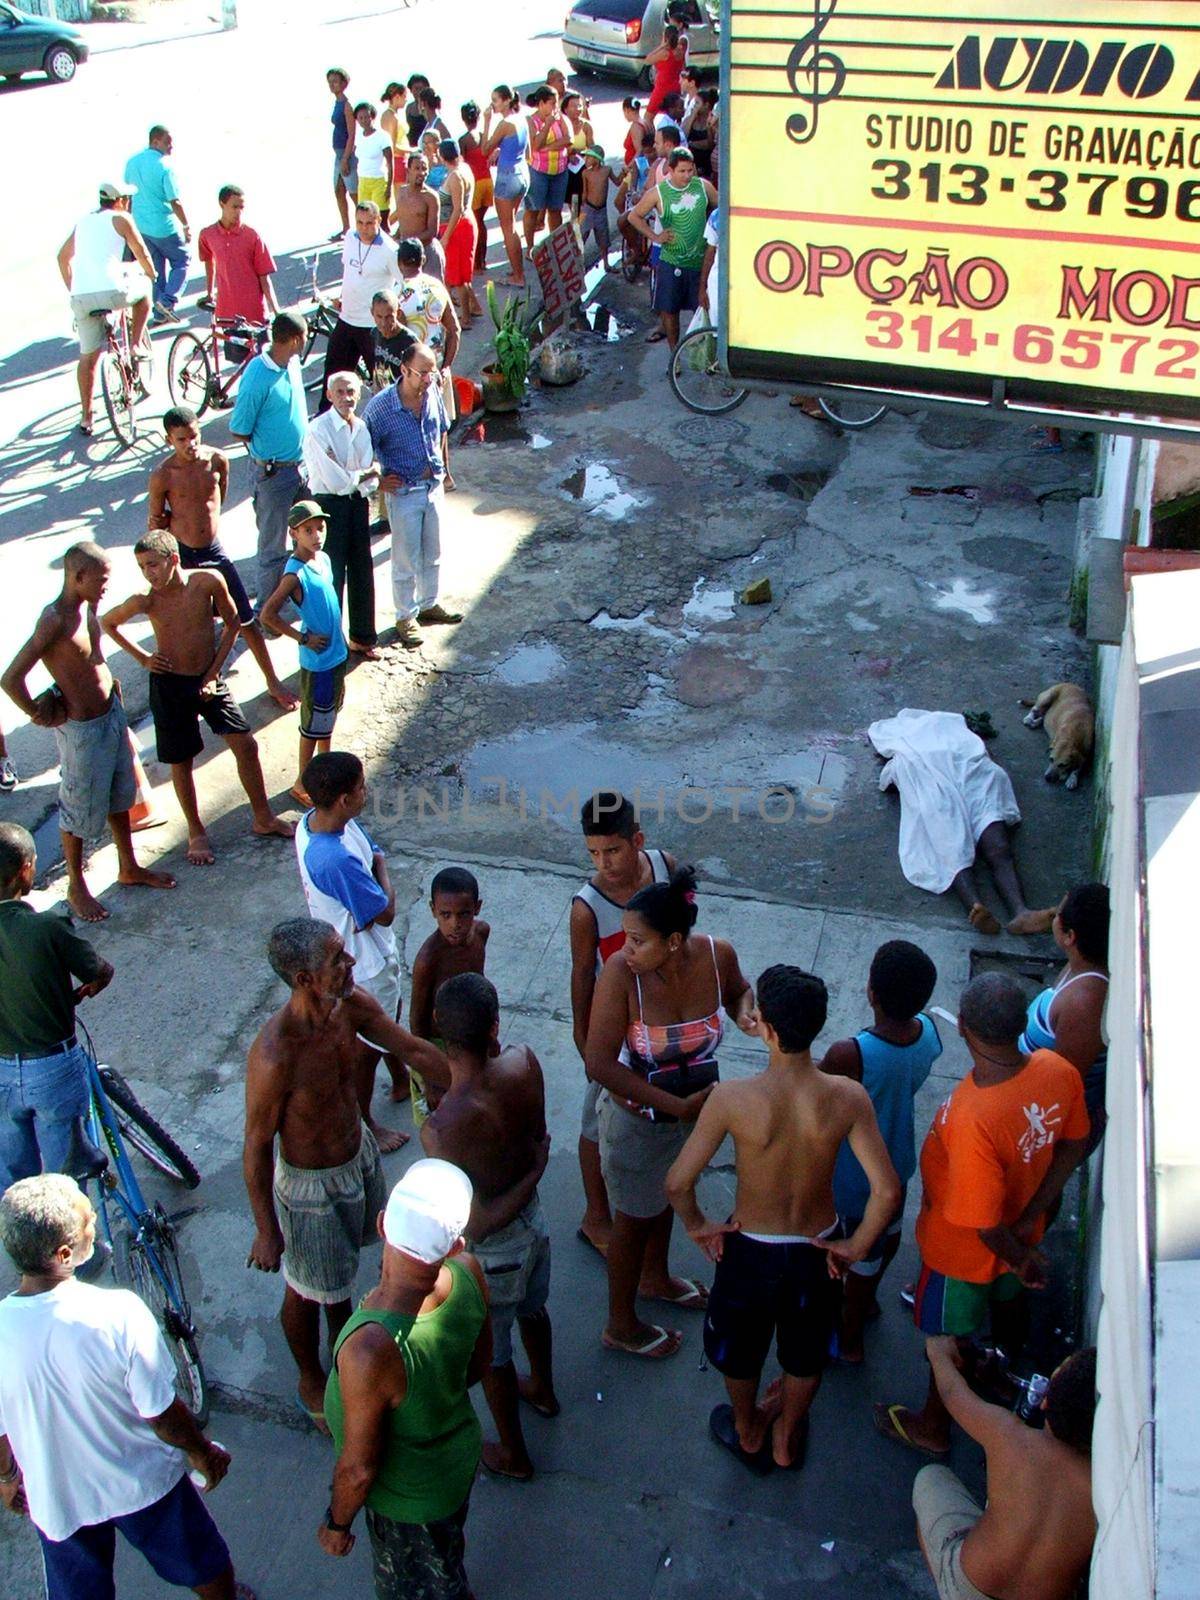 salvador, bahia, brazil - may 25, 2005: Black man is murdered in the street of the city of Salvador.